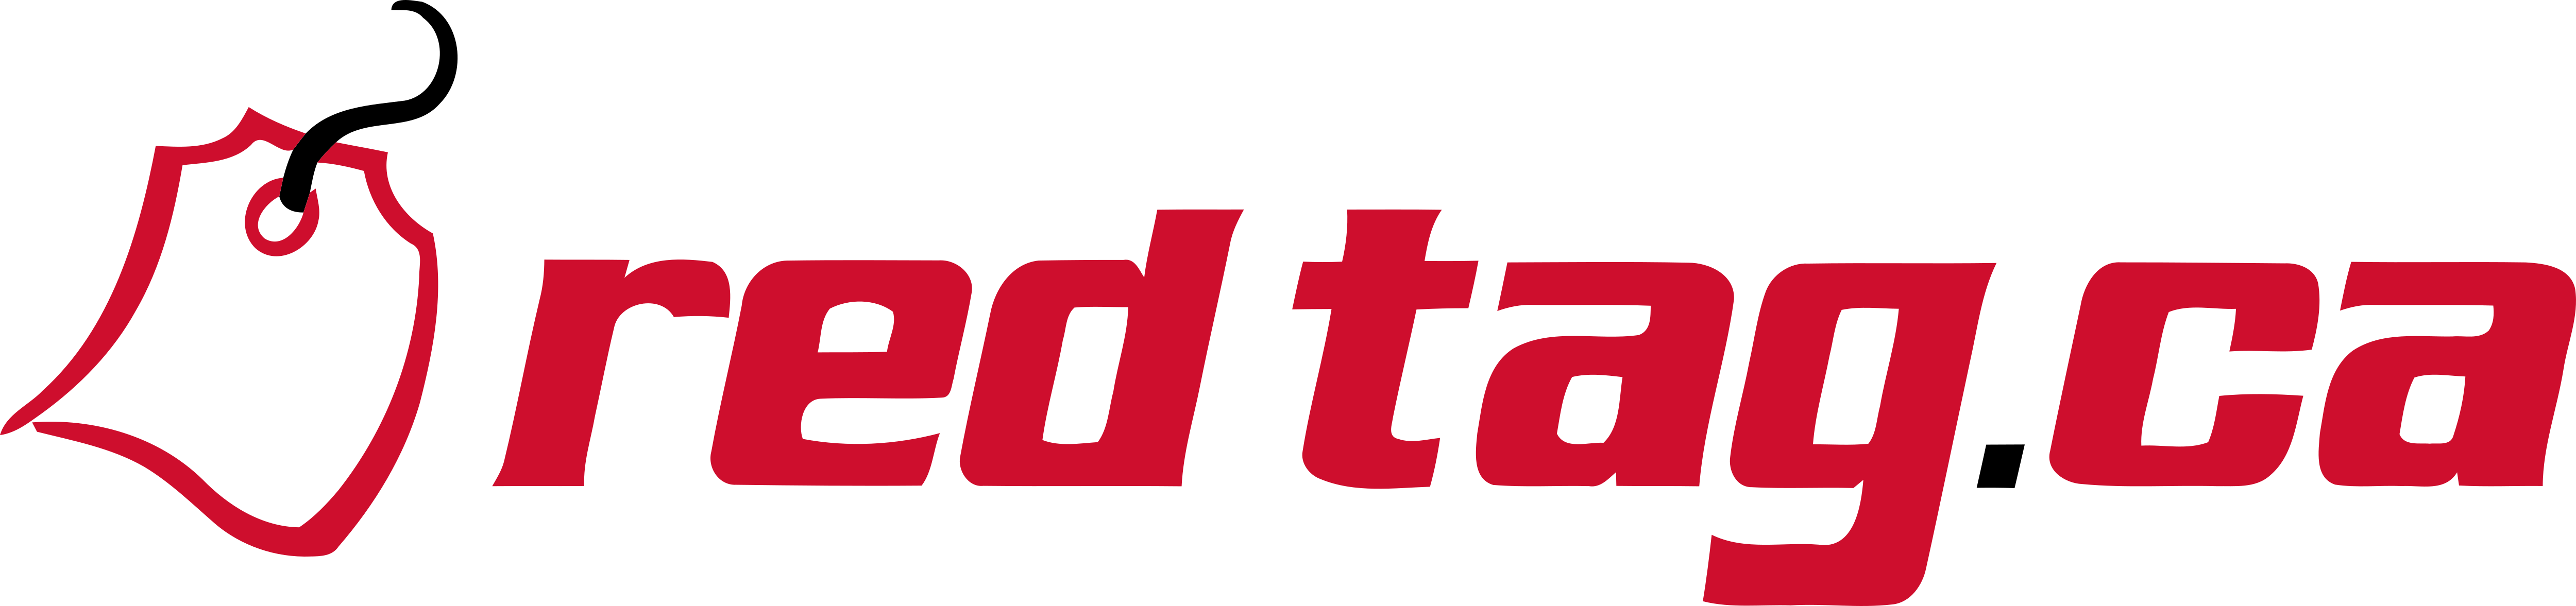 Redtag.ca is a TrustYou OTA’s, MetaSearch & GDS Partner